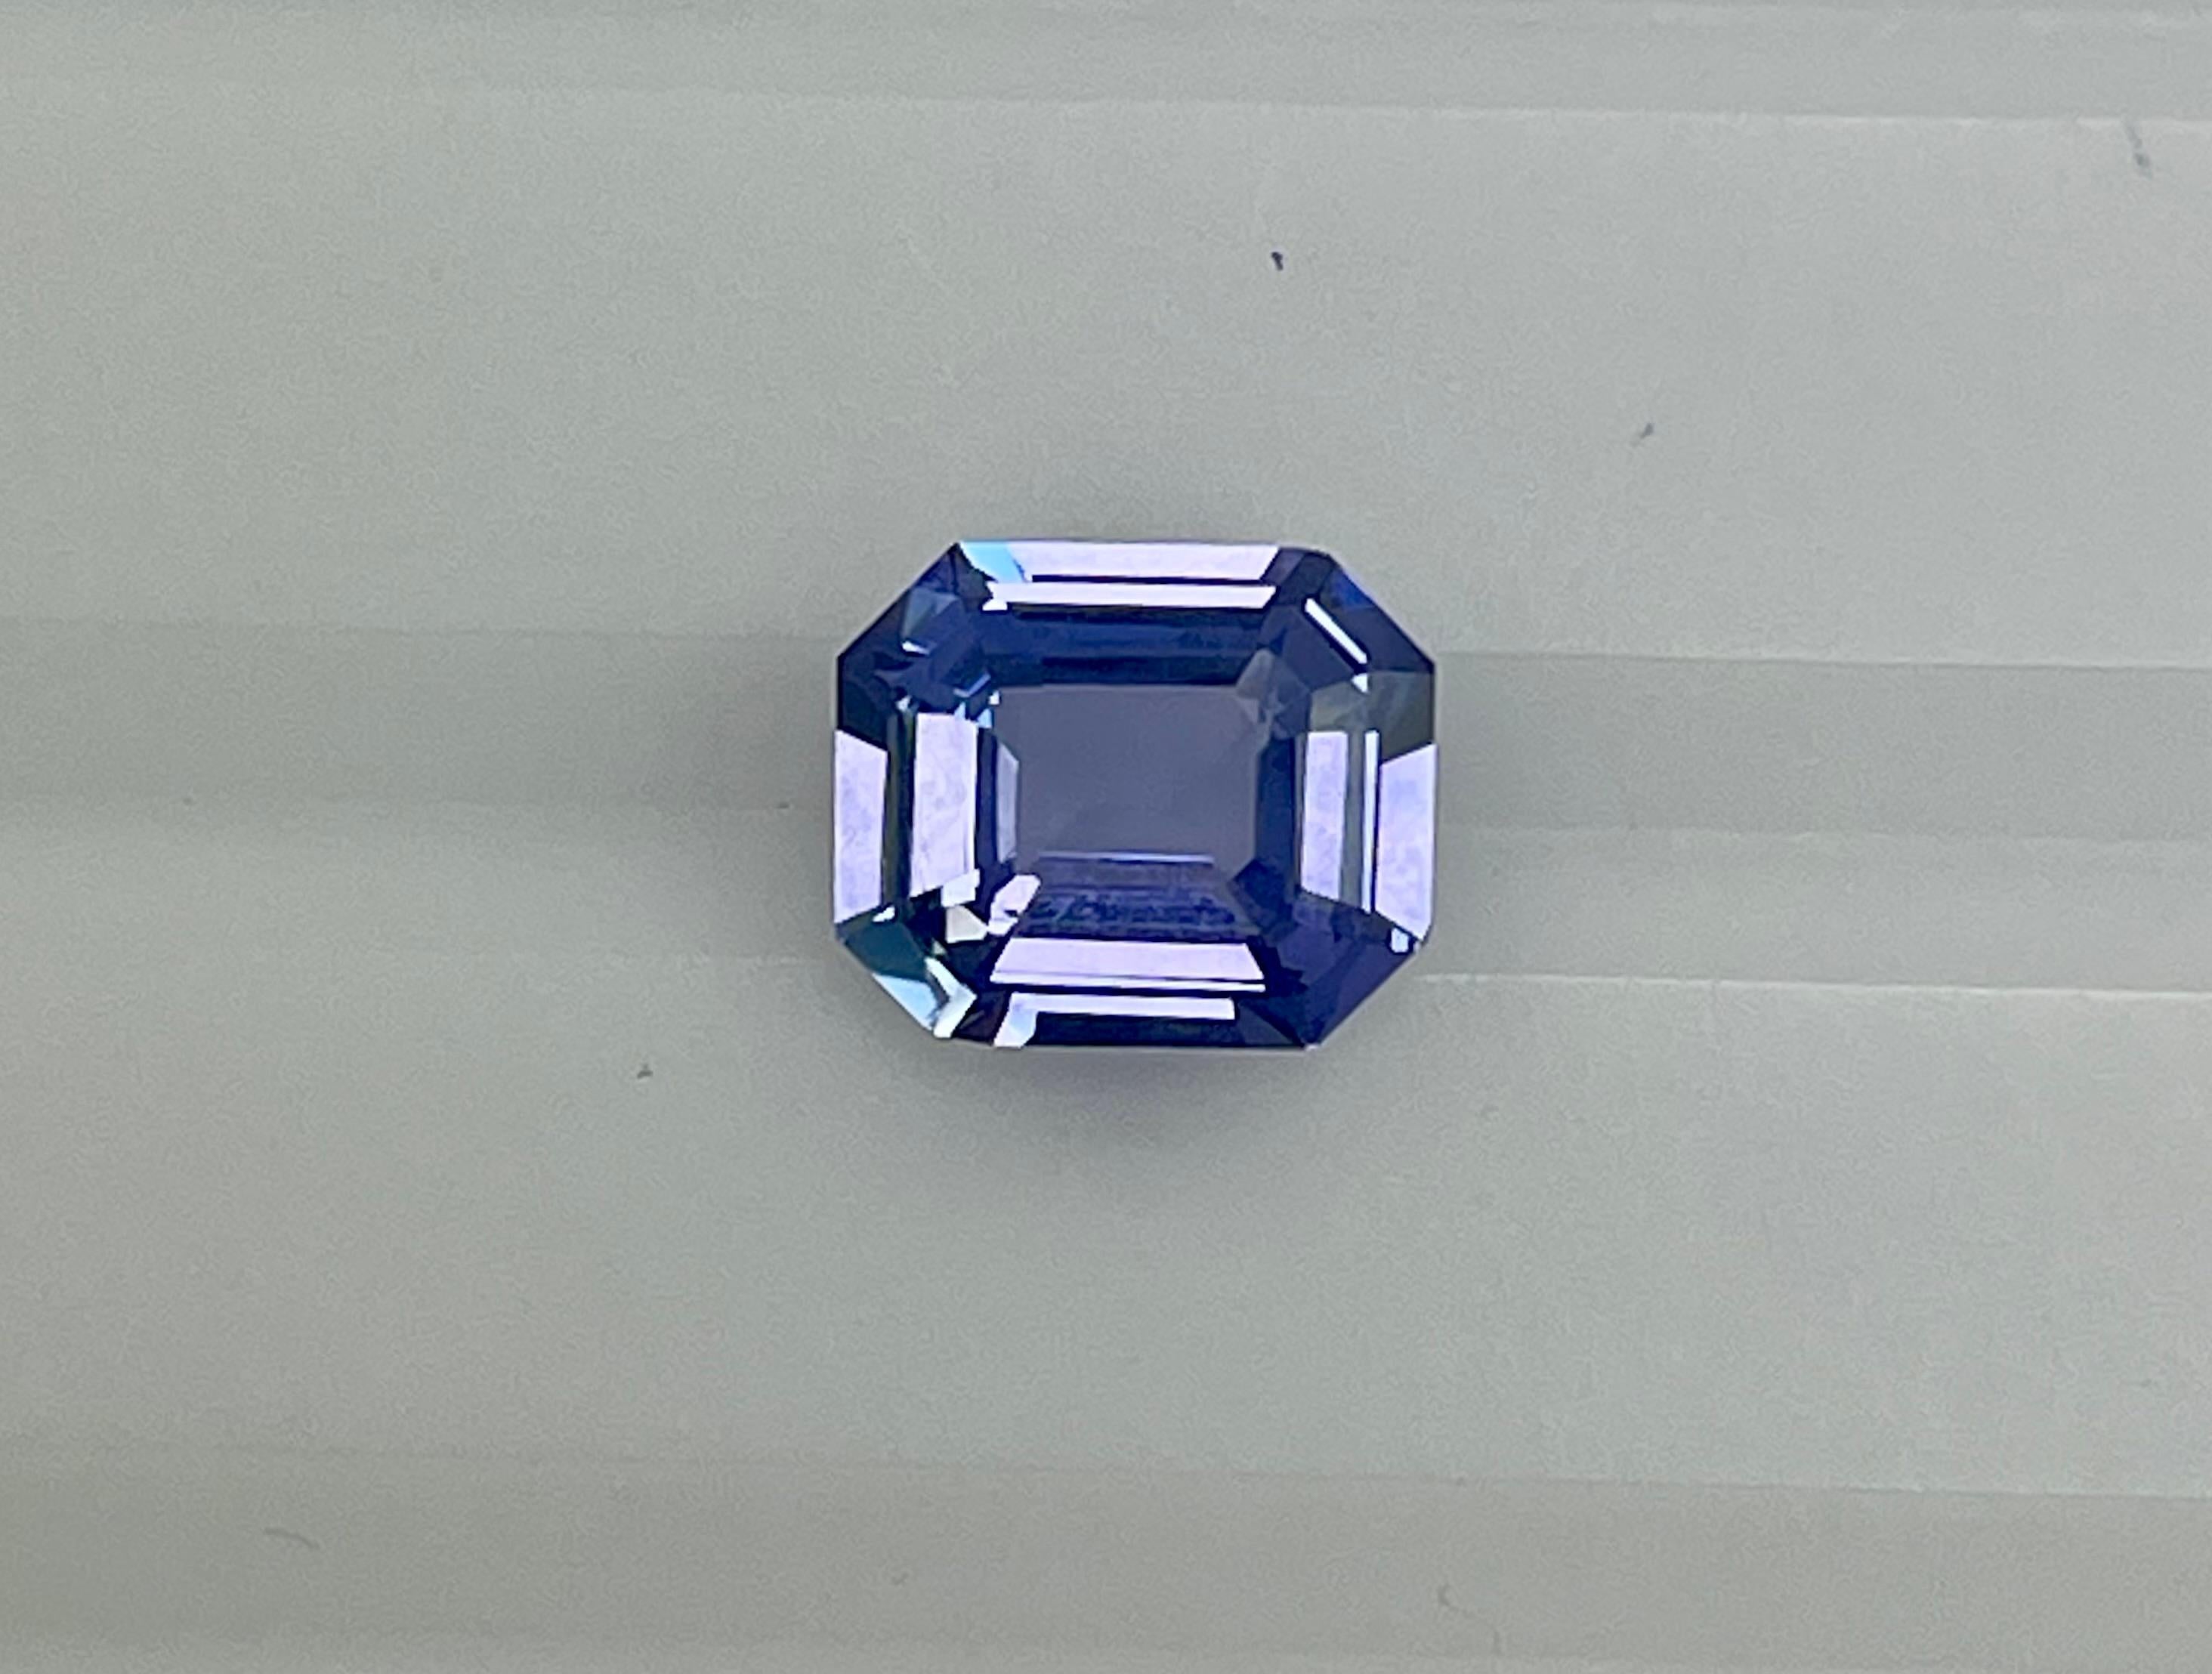 This beautifully cut 2.65 Ct Emerald cut is of the purple color variety of the sapphire and it has excellent color and clarity which makes this beautiful sapphire so unique and desirable. It is certified BY CDC lab 